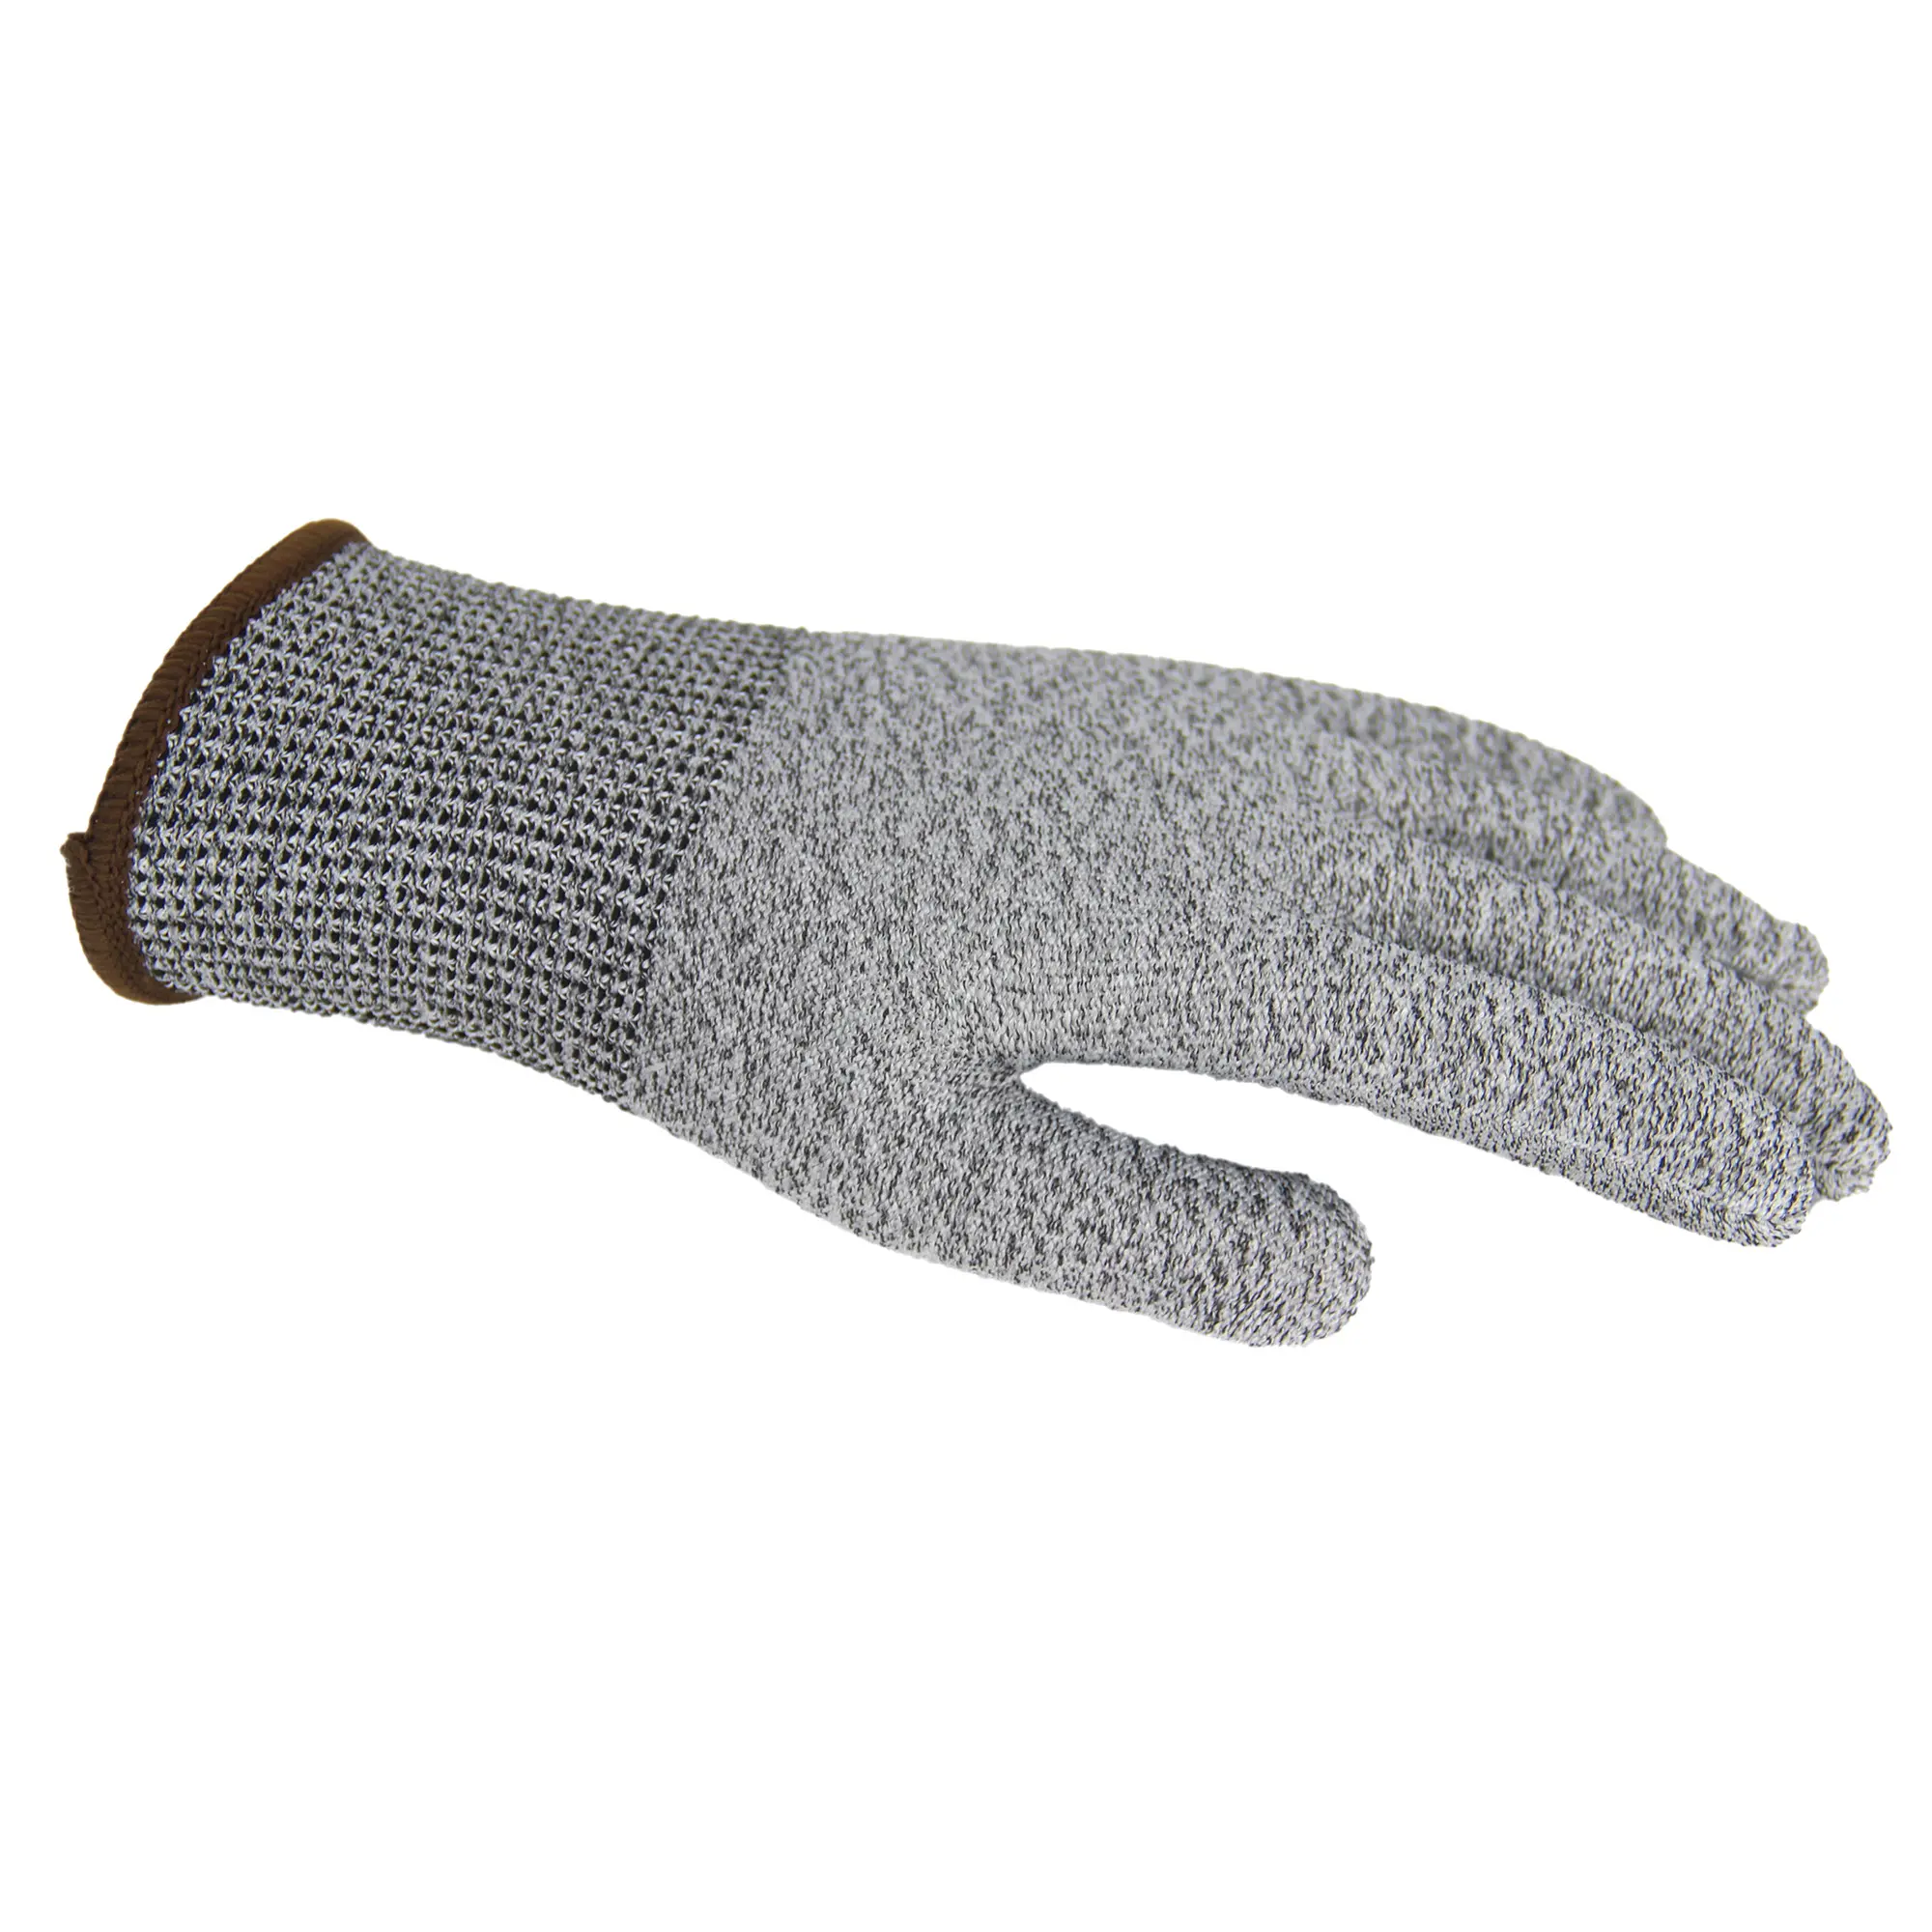 Anti-cut Metalmix fiber Knitted safety gloves breathable good moisture wicking comfortable work gloves